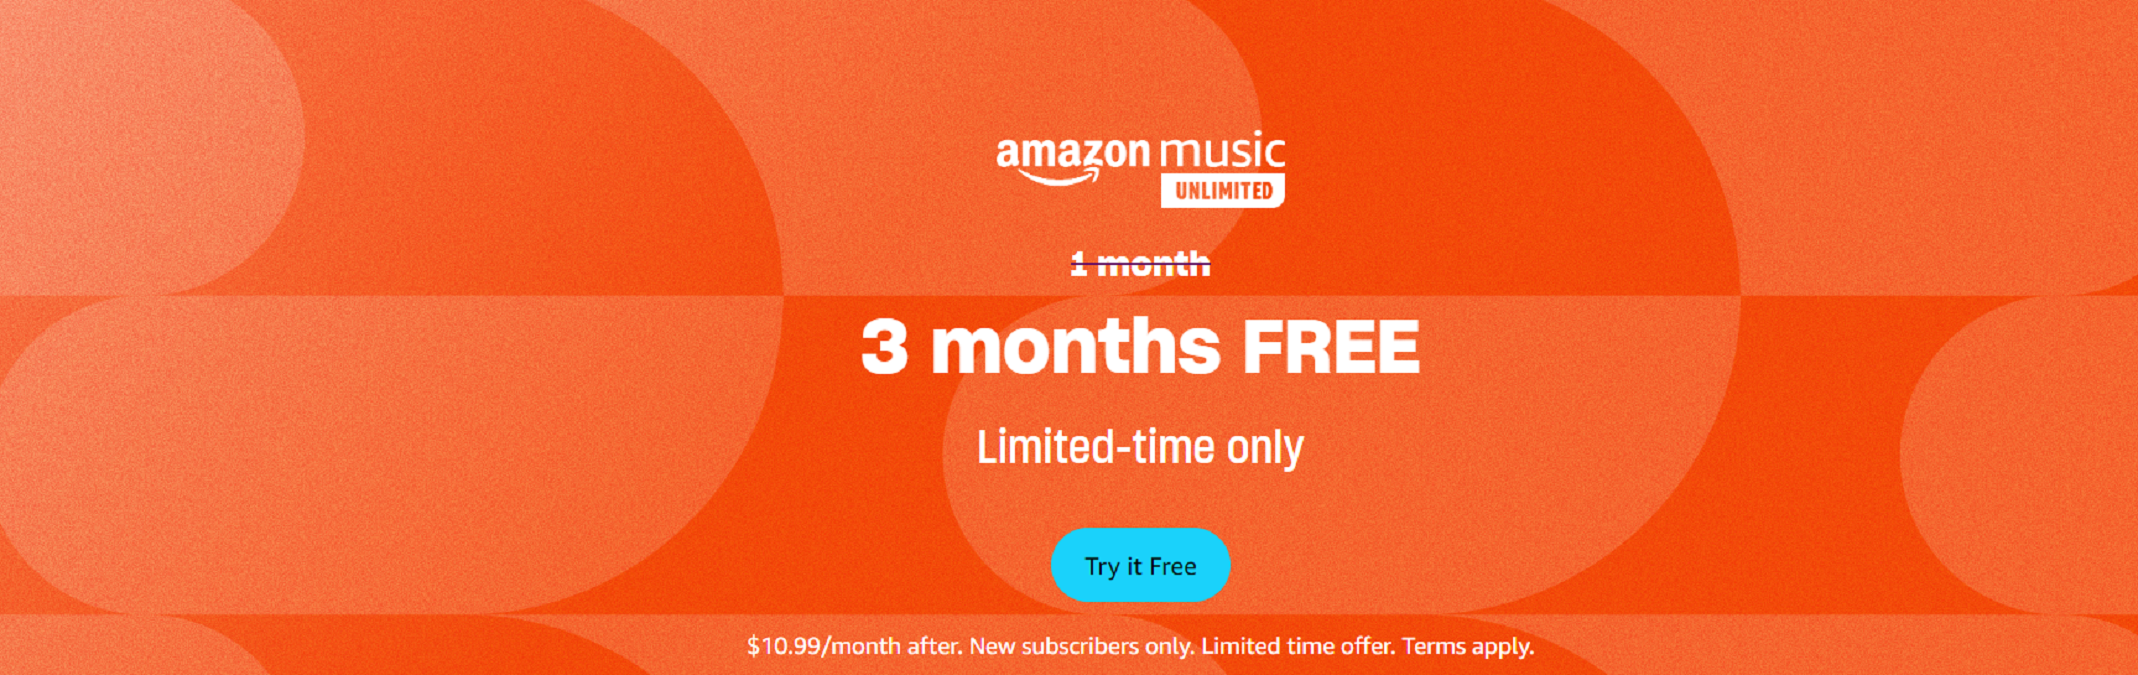 Amazon Music Unlimited: 3 Months Free